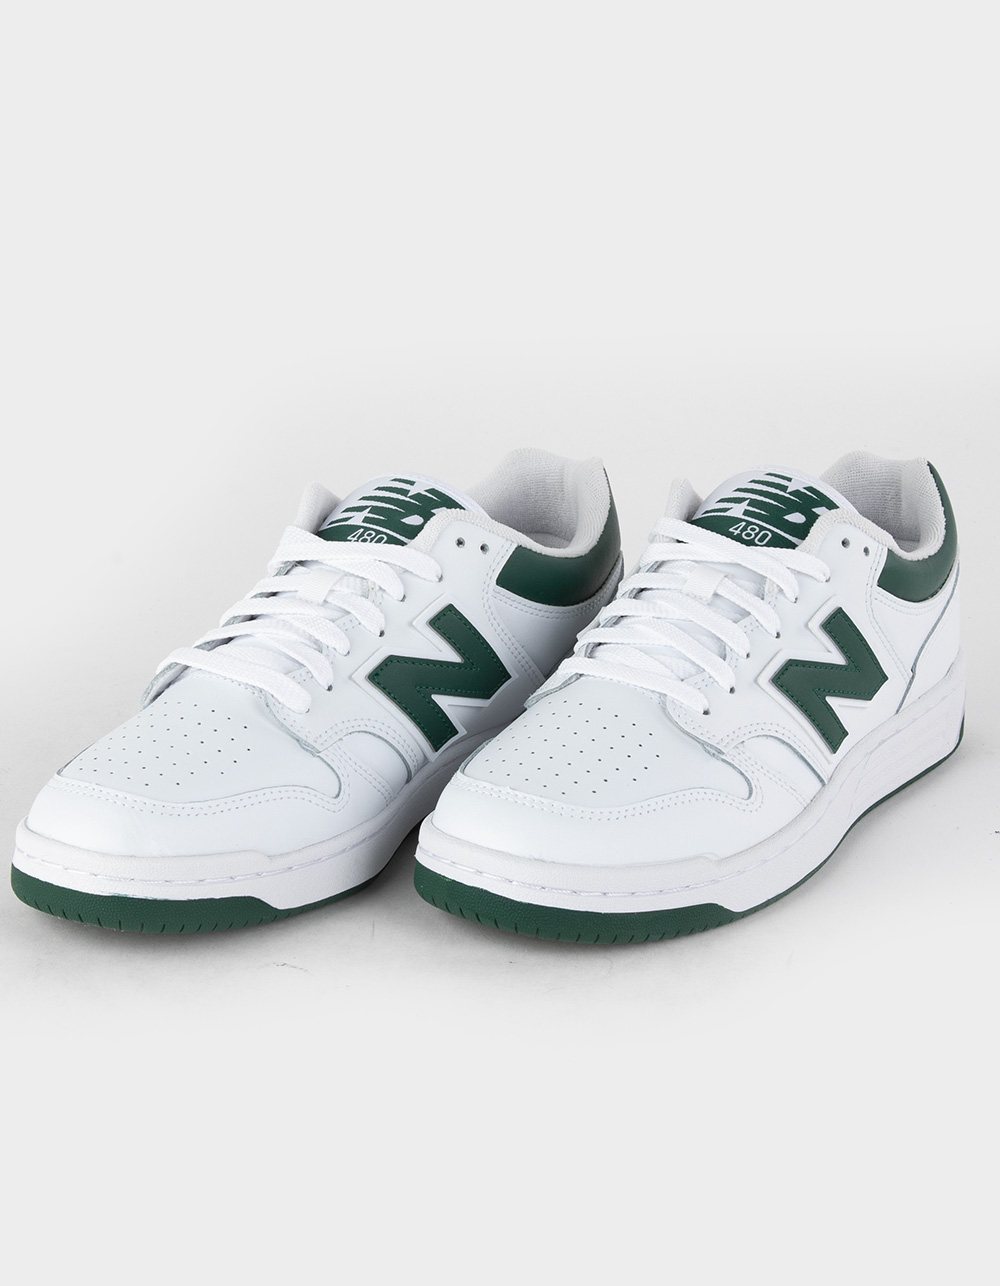 New Balance Shoes, Clothing, & More